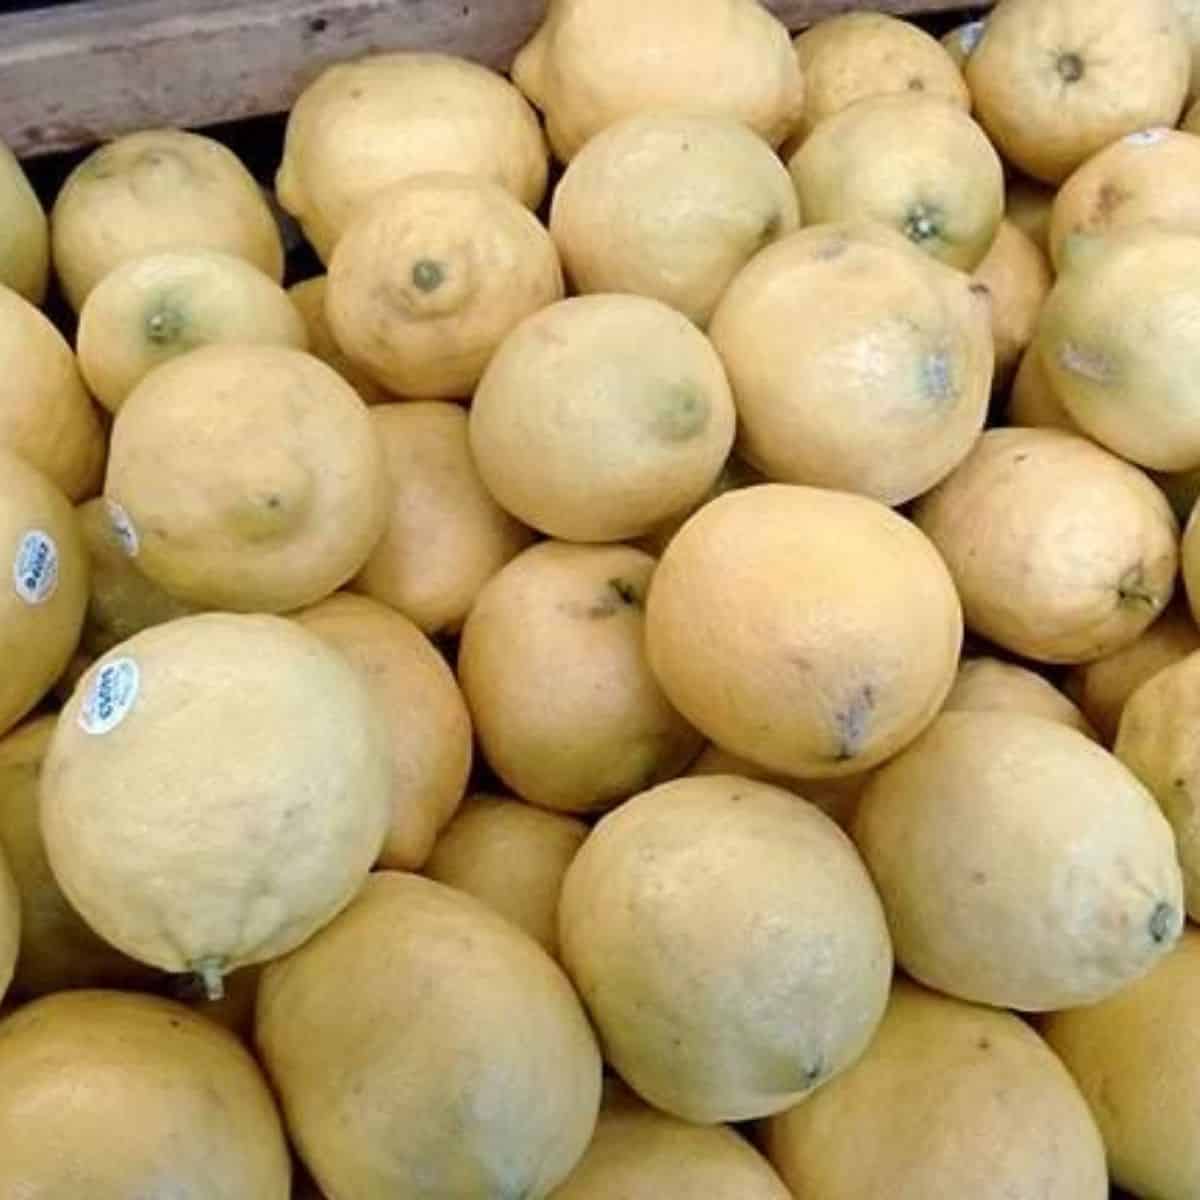 A display of lemons at a grocery store.